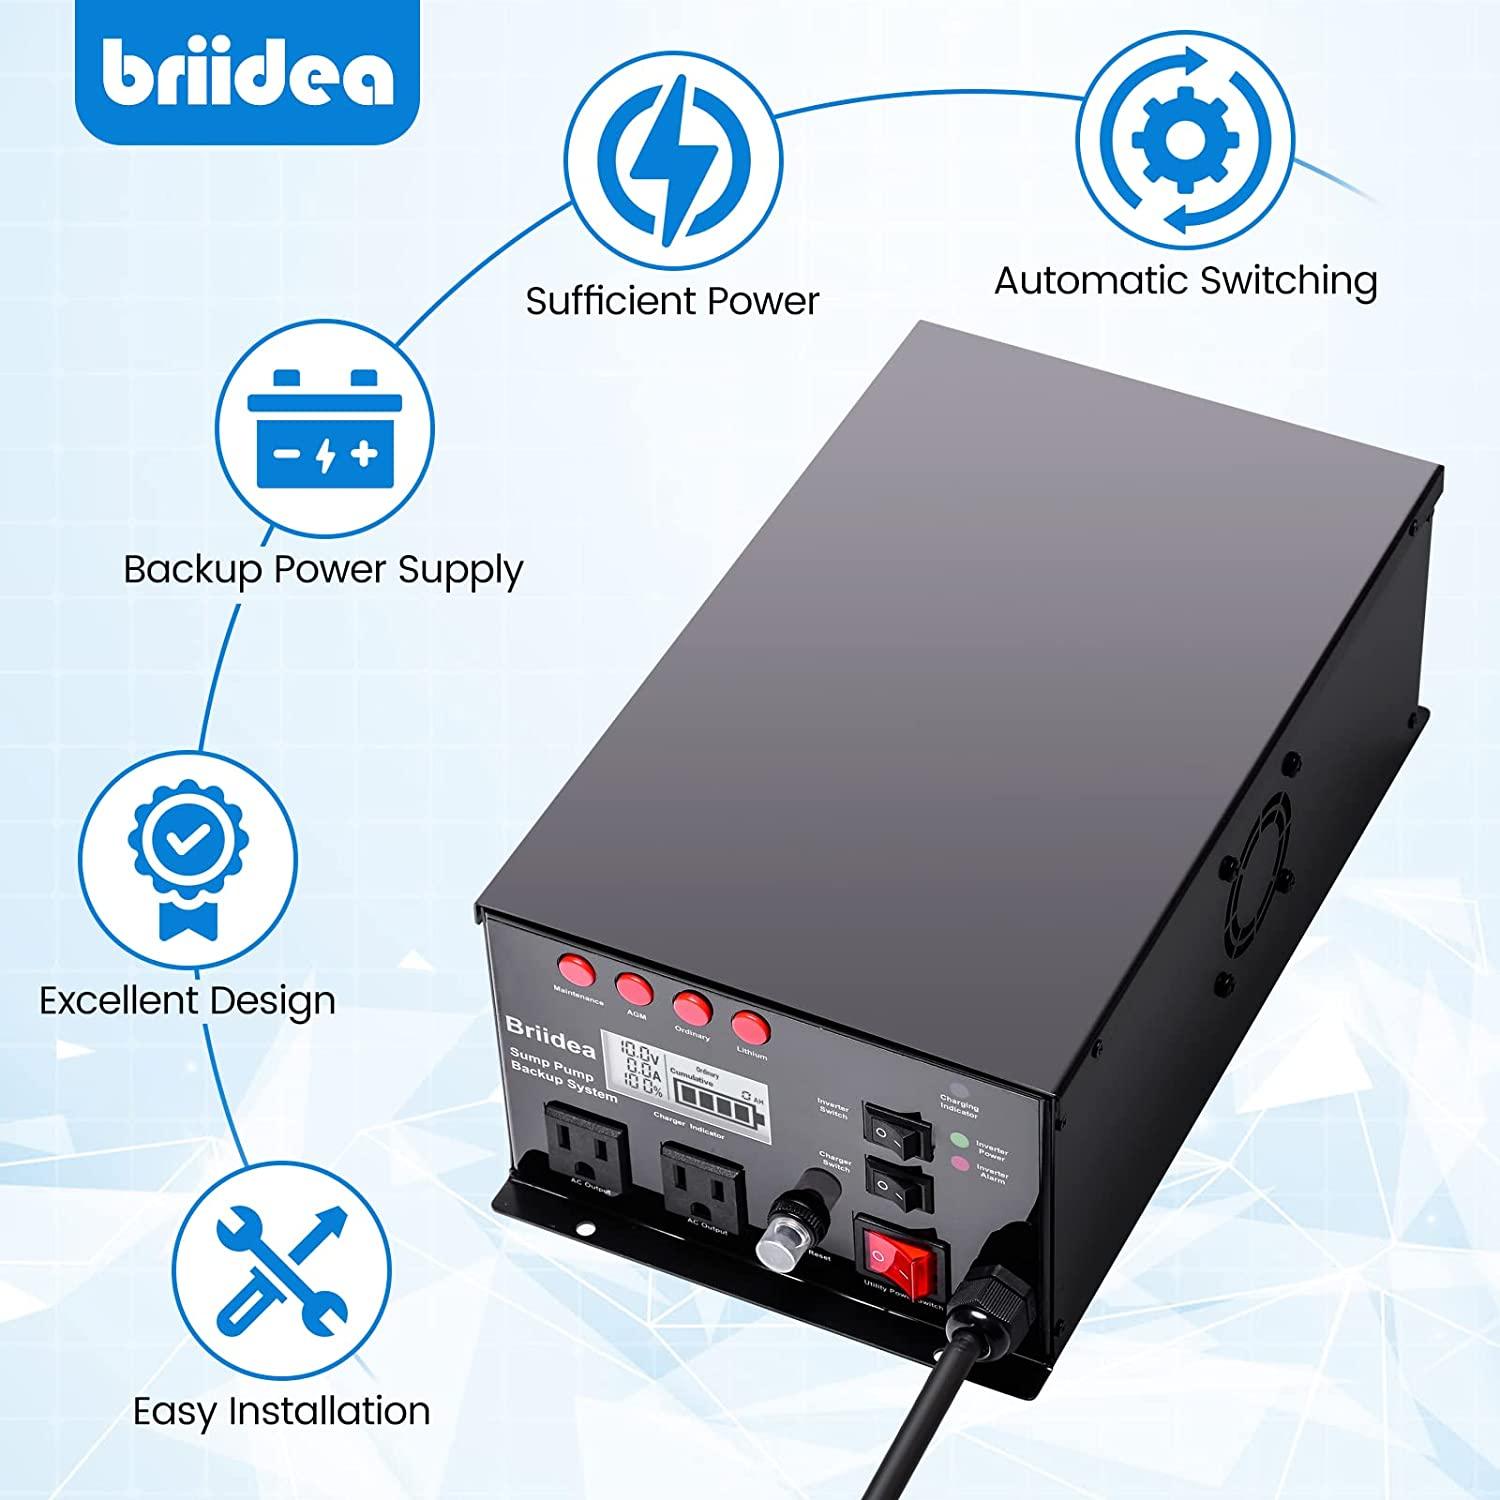 Briidea 1500W Sump Pump Battery Backup System - Auto Switches to Battery Inverter Power for Continuous Sump Pump Operation during Power Outages - briidea